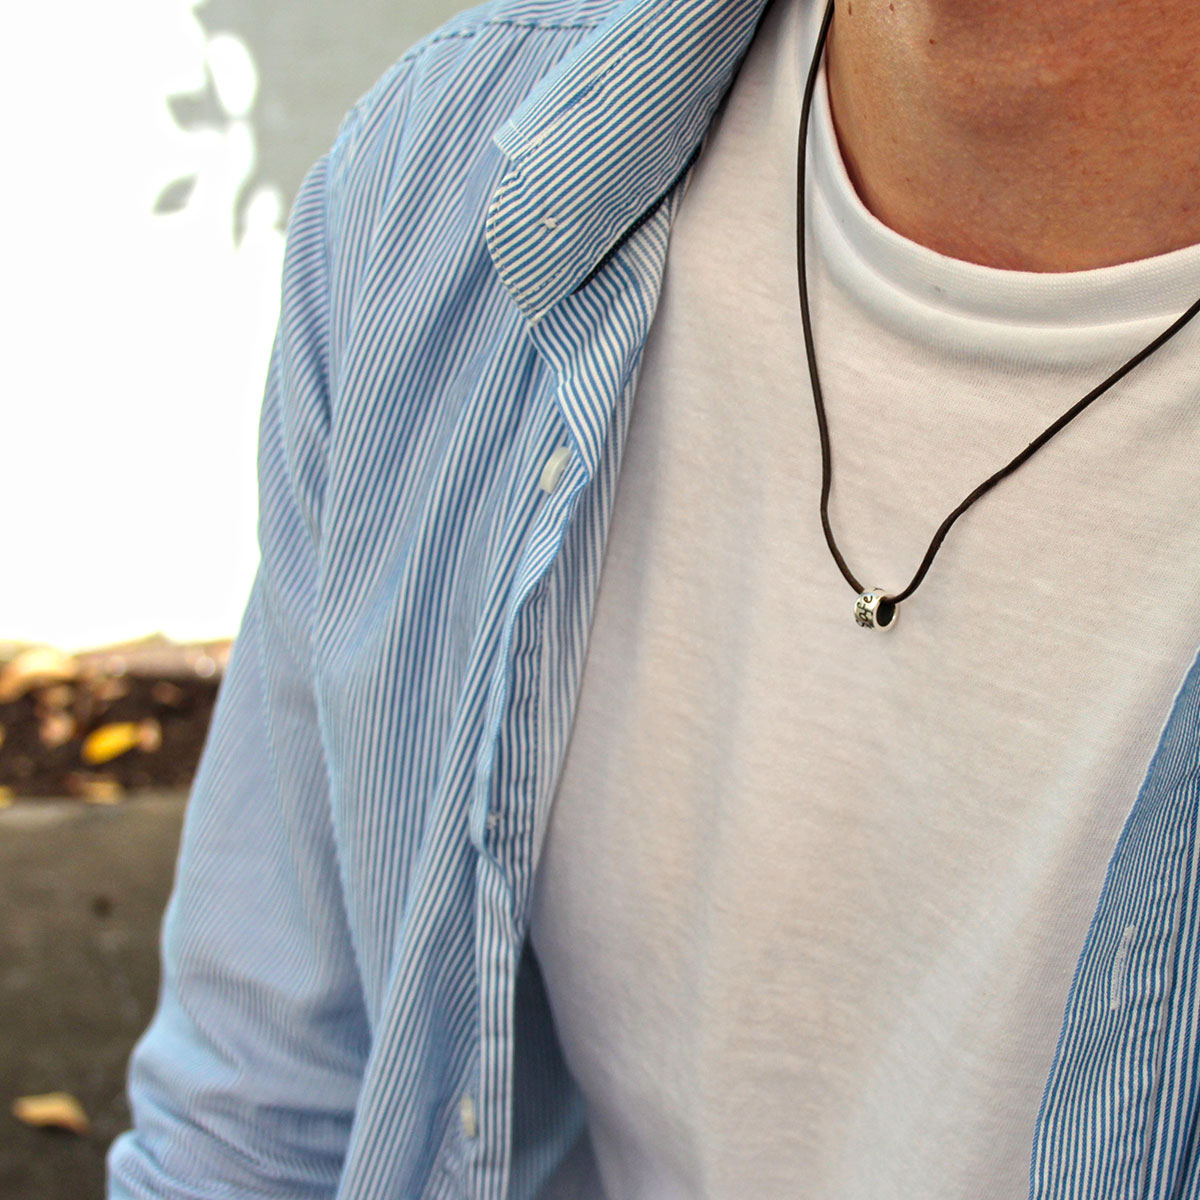 Travel Safe Silver &amp; Leather Necklace for men &amp; women - gift for someone going travelling